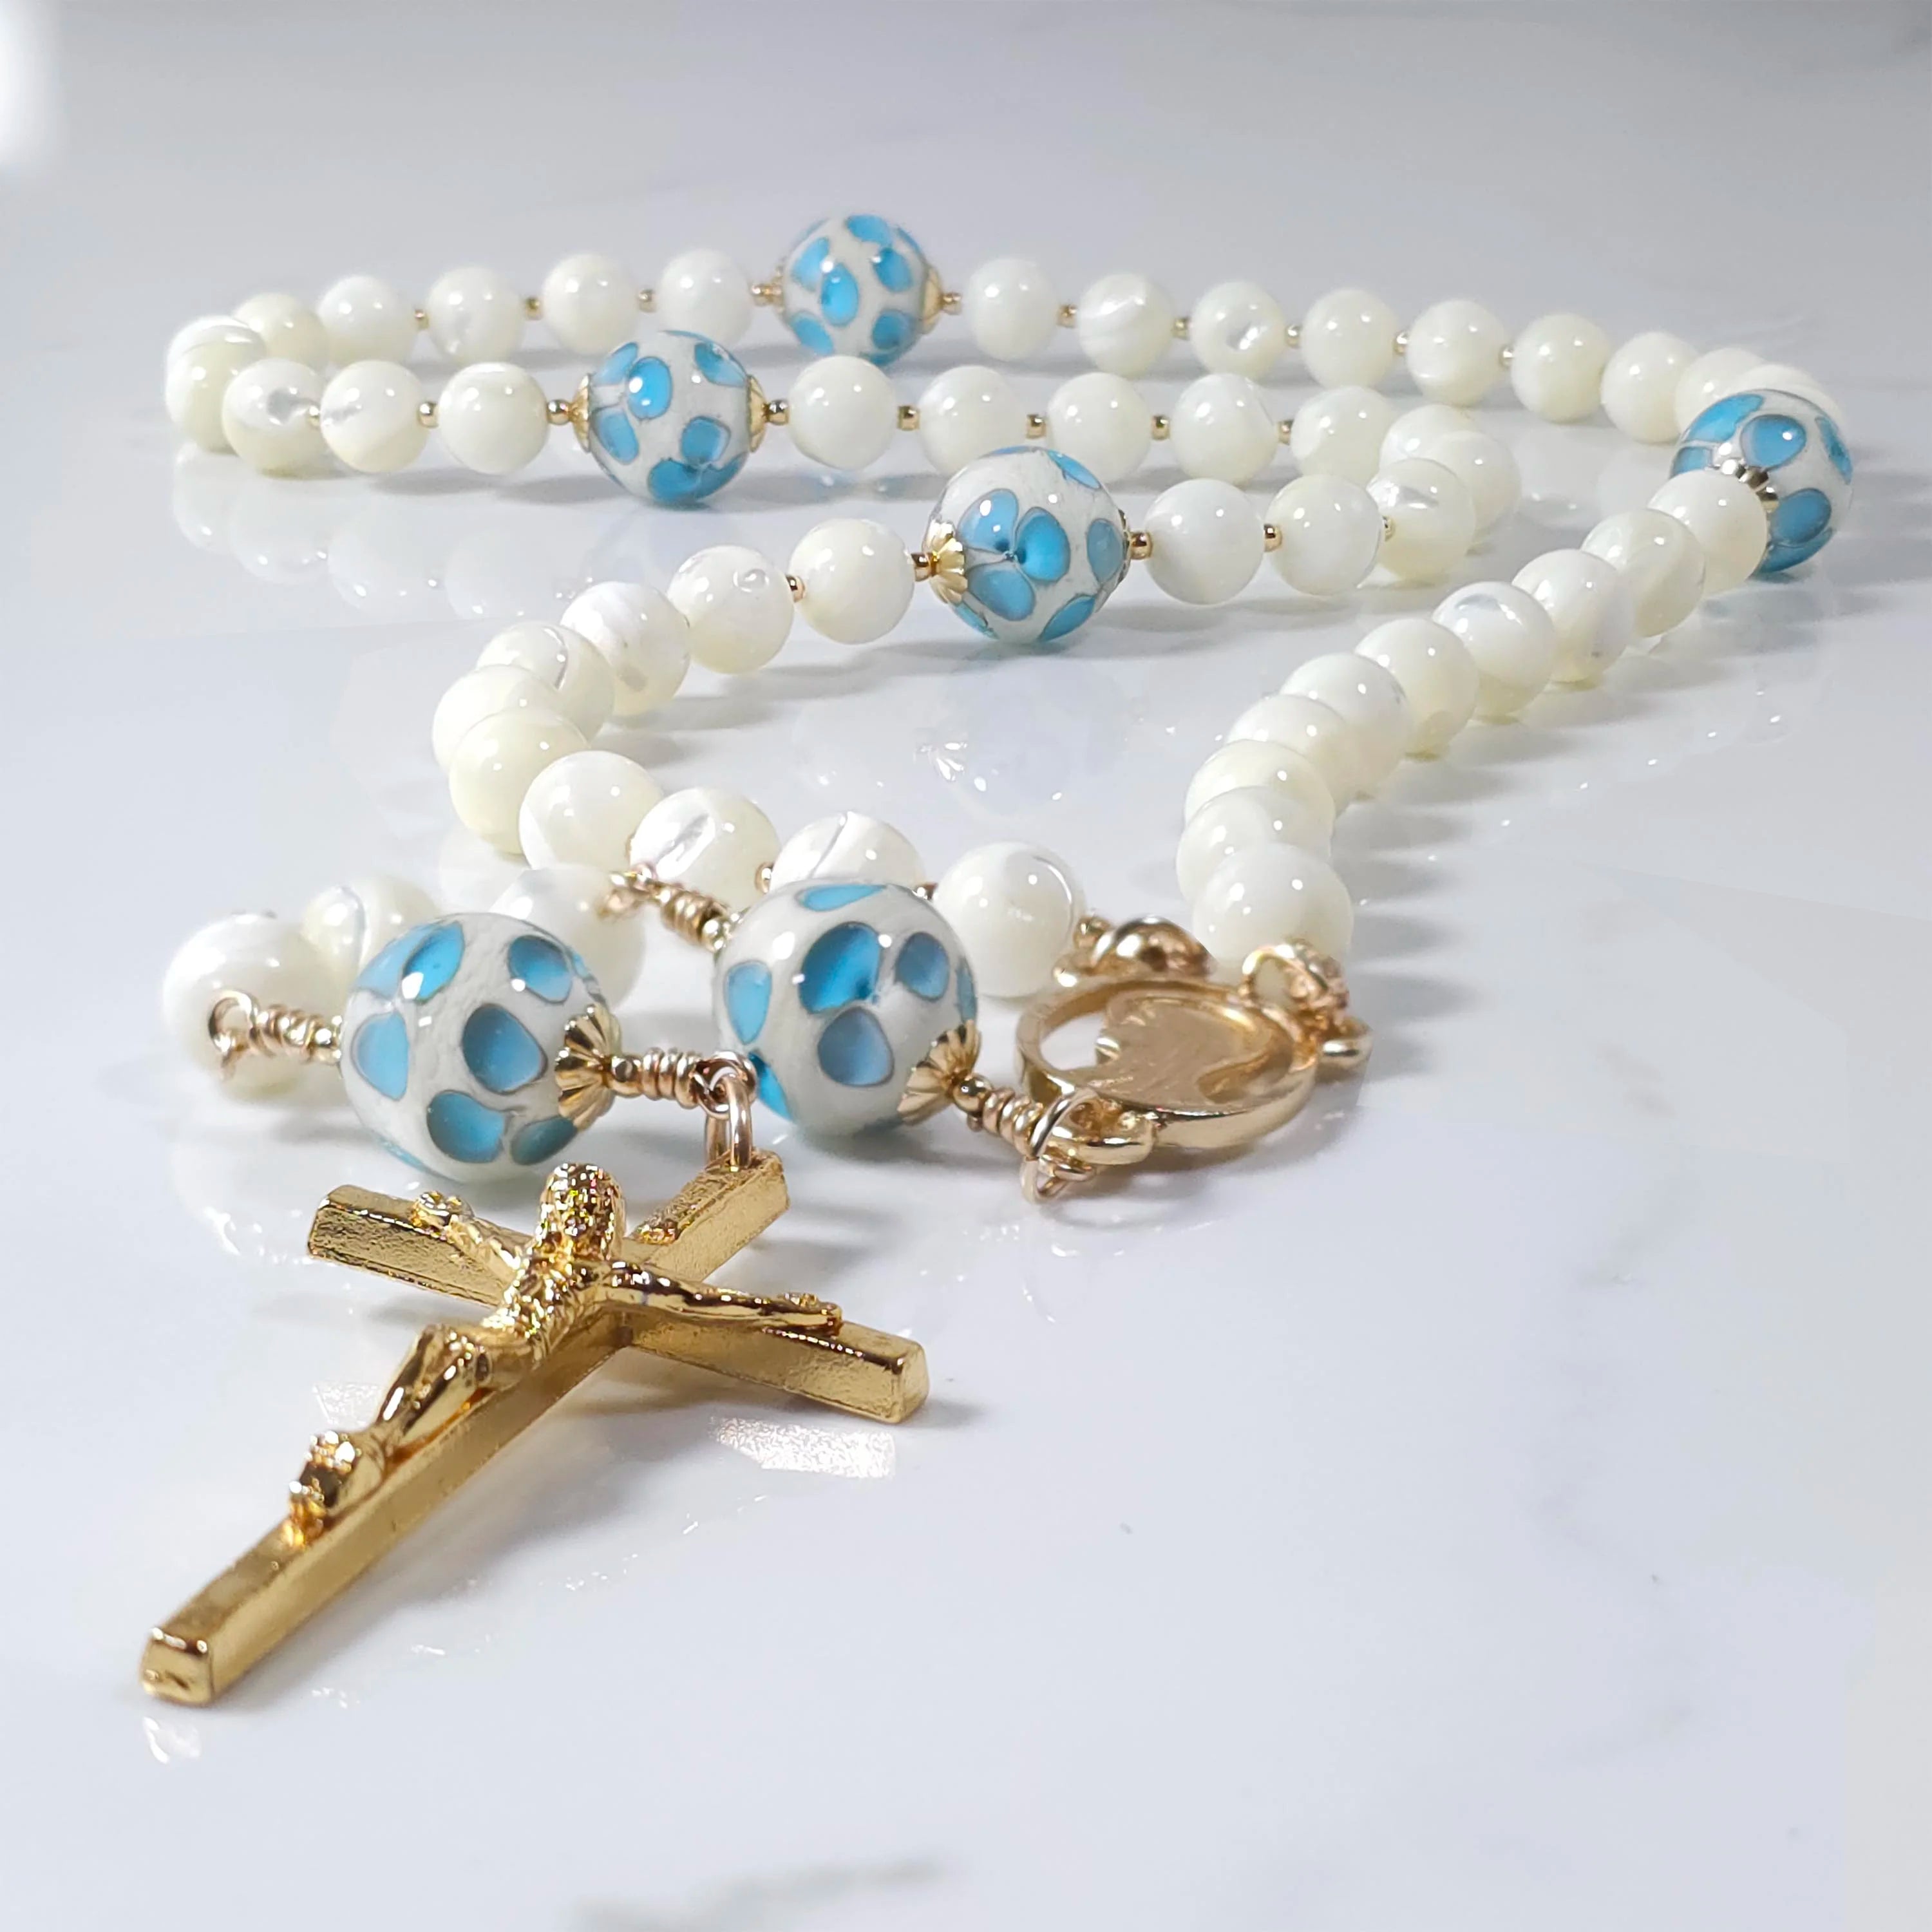 Our lady rosary or  Nostra Domina rosary  inspired by our lady who wear marian blue robe.